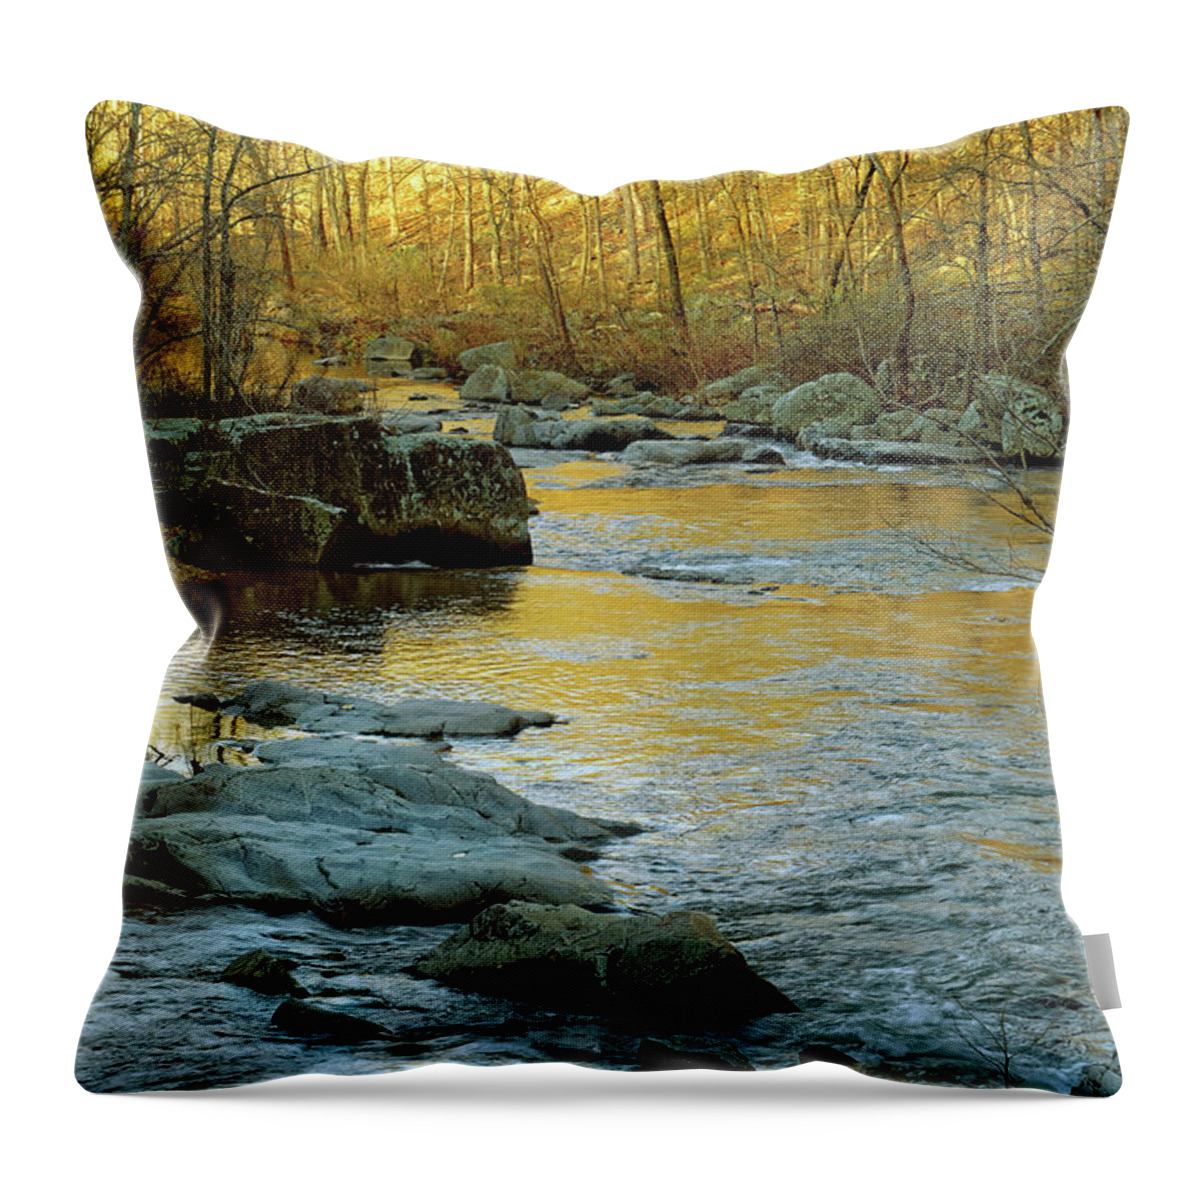 2016 Throw Pillow featuring the photograph Liquid Gold by Robert Charity